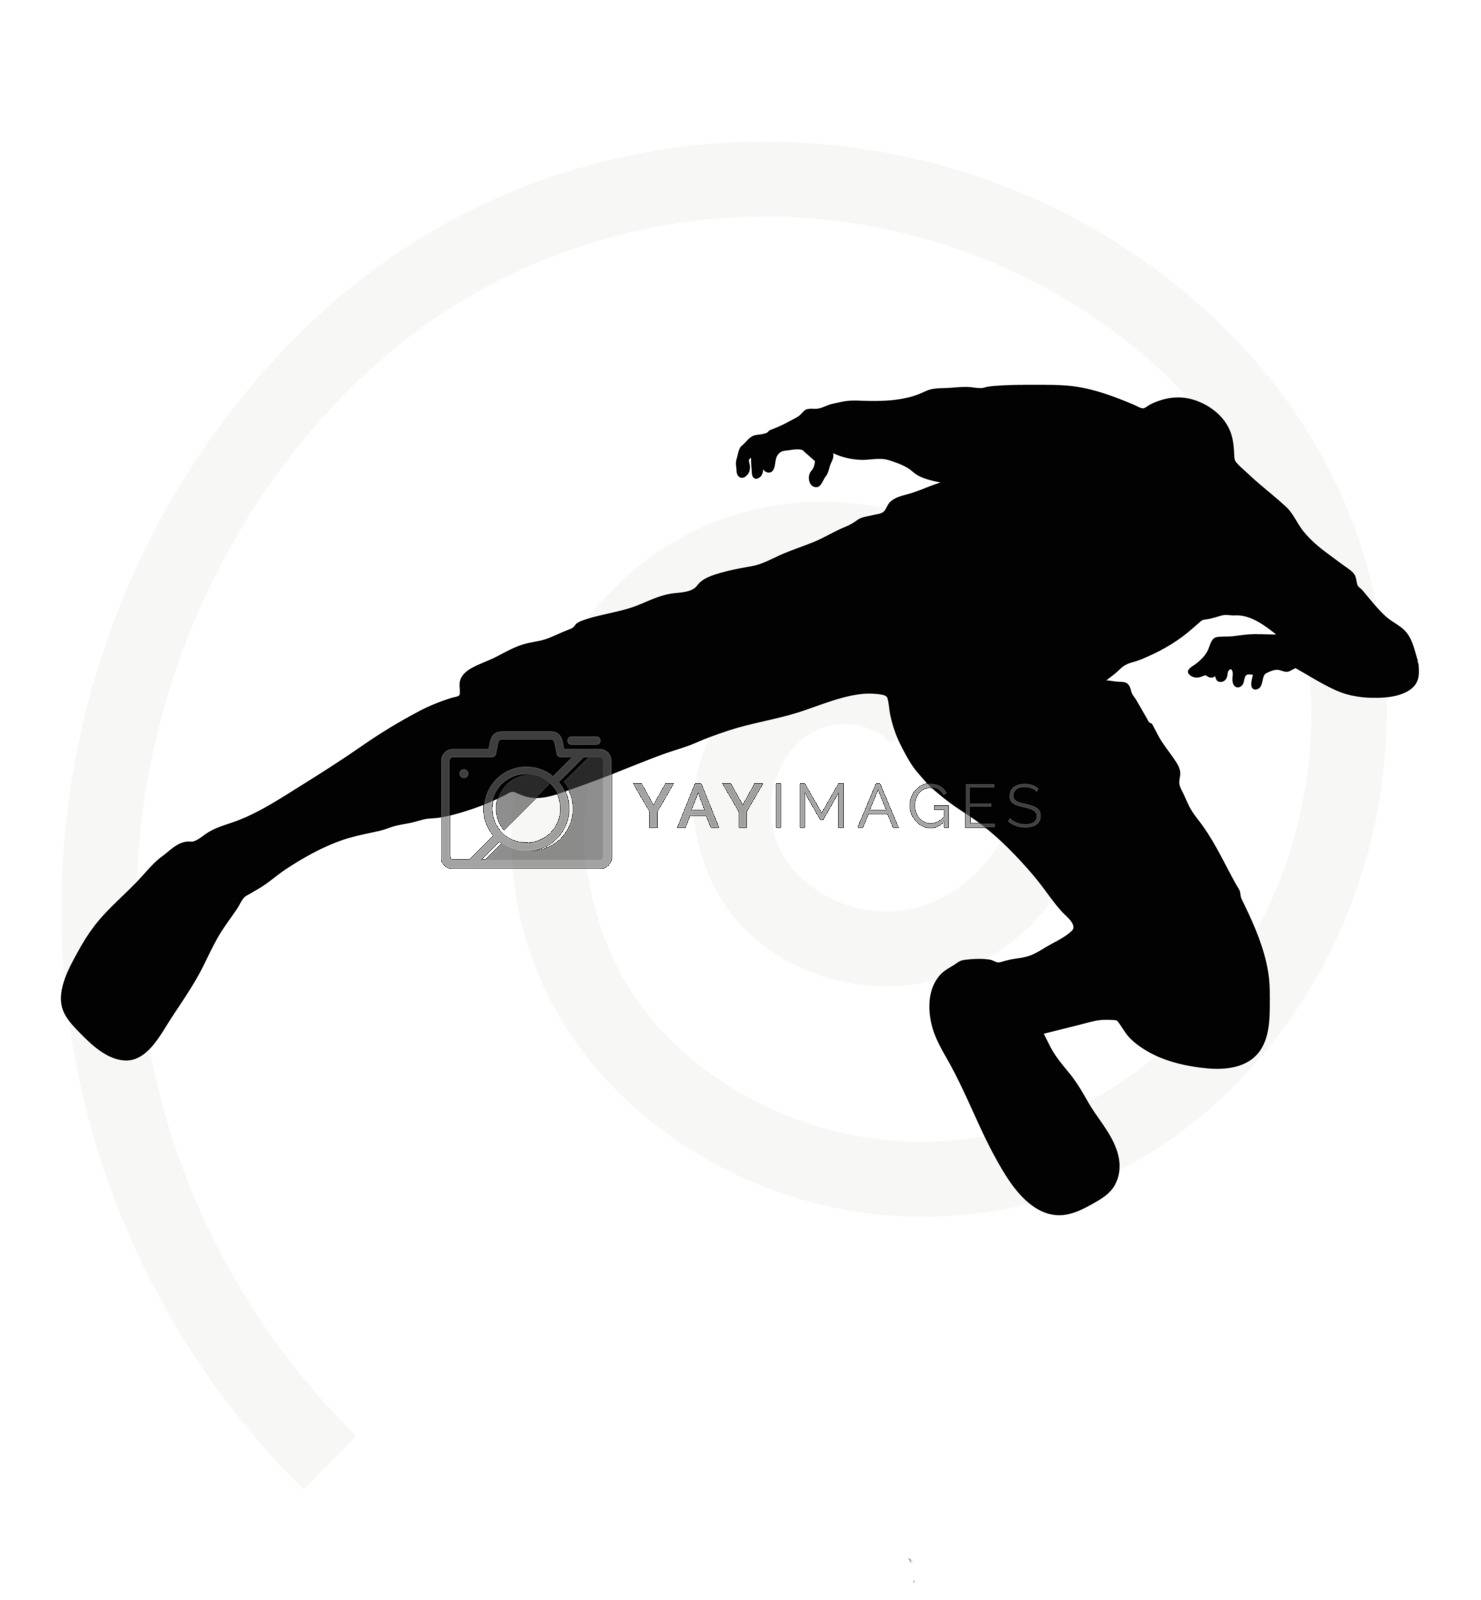 Royalty free image of illustration of senior climber man silhouette by Istanbul2009